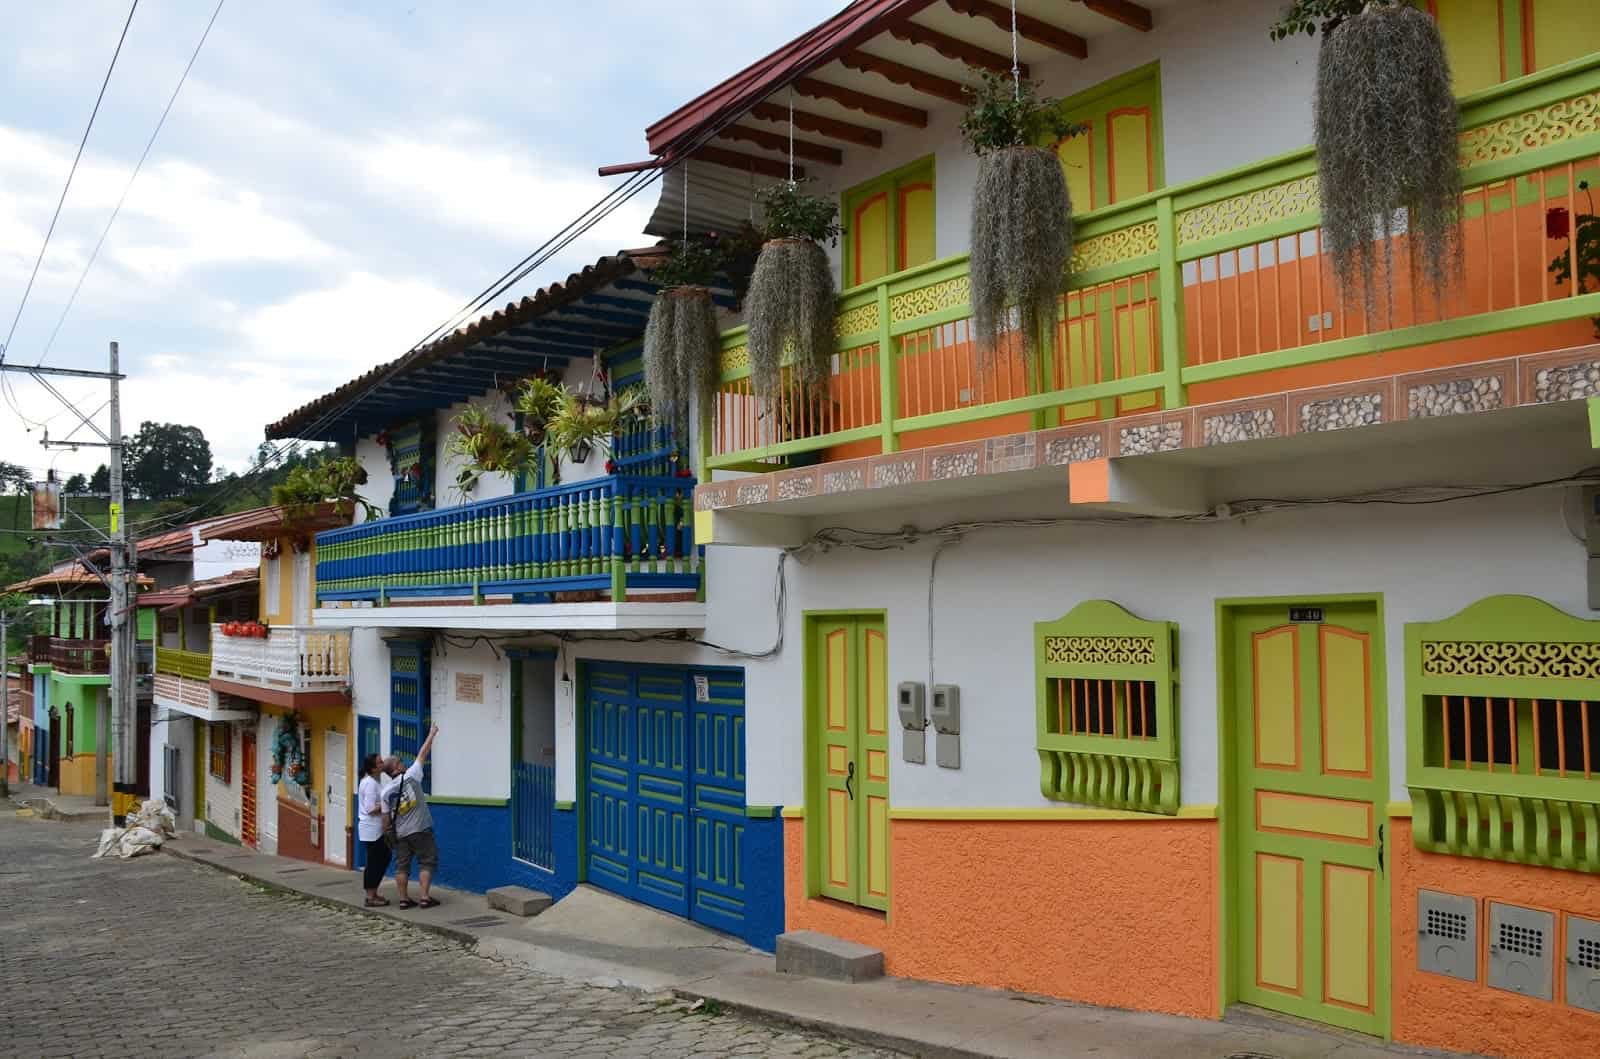 Colorful homes in Jericó, Antioquia, Colombia